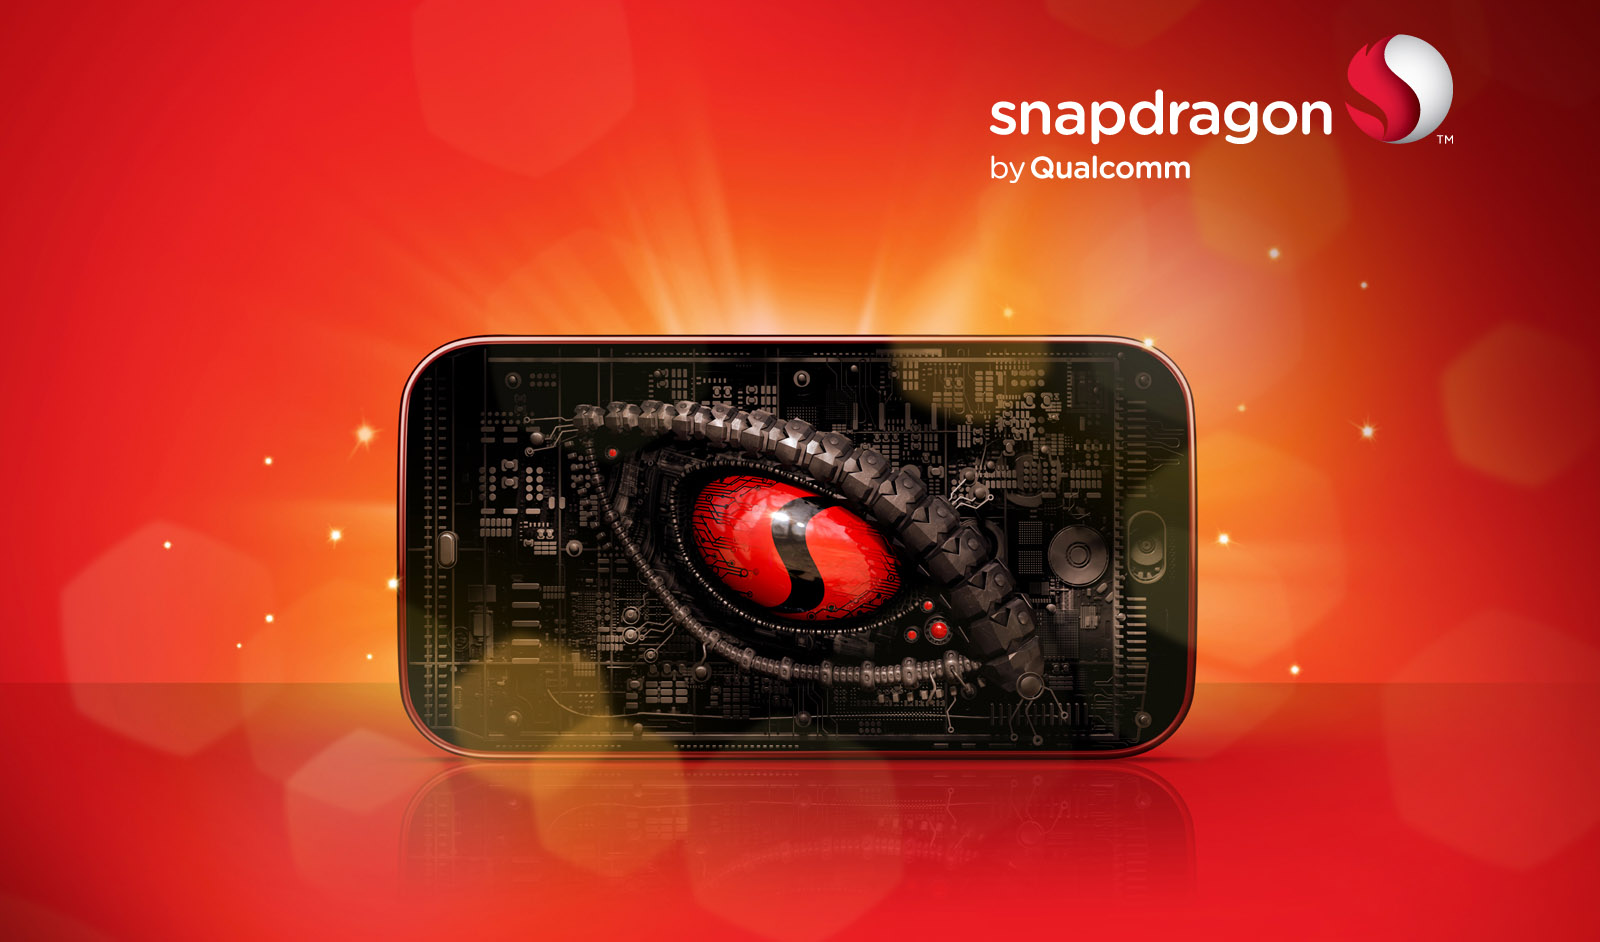 New Generation Snapdragon chipsets from Qualcomm - with IR depth sensing